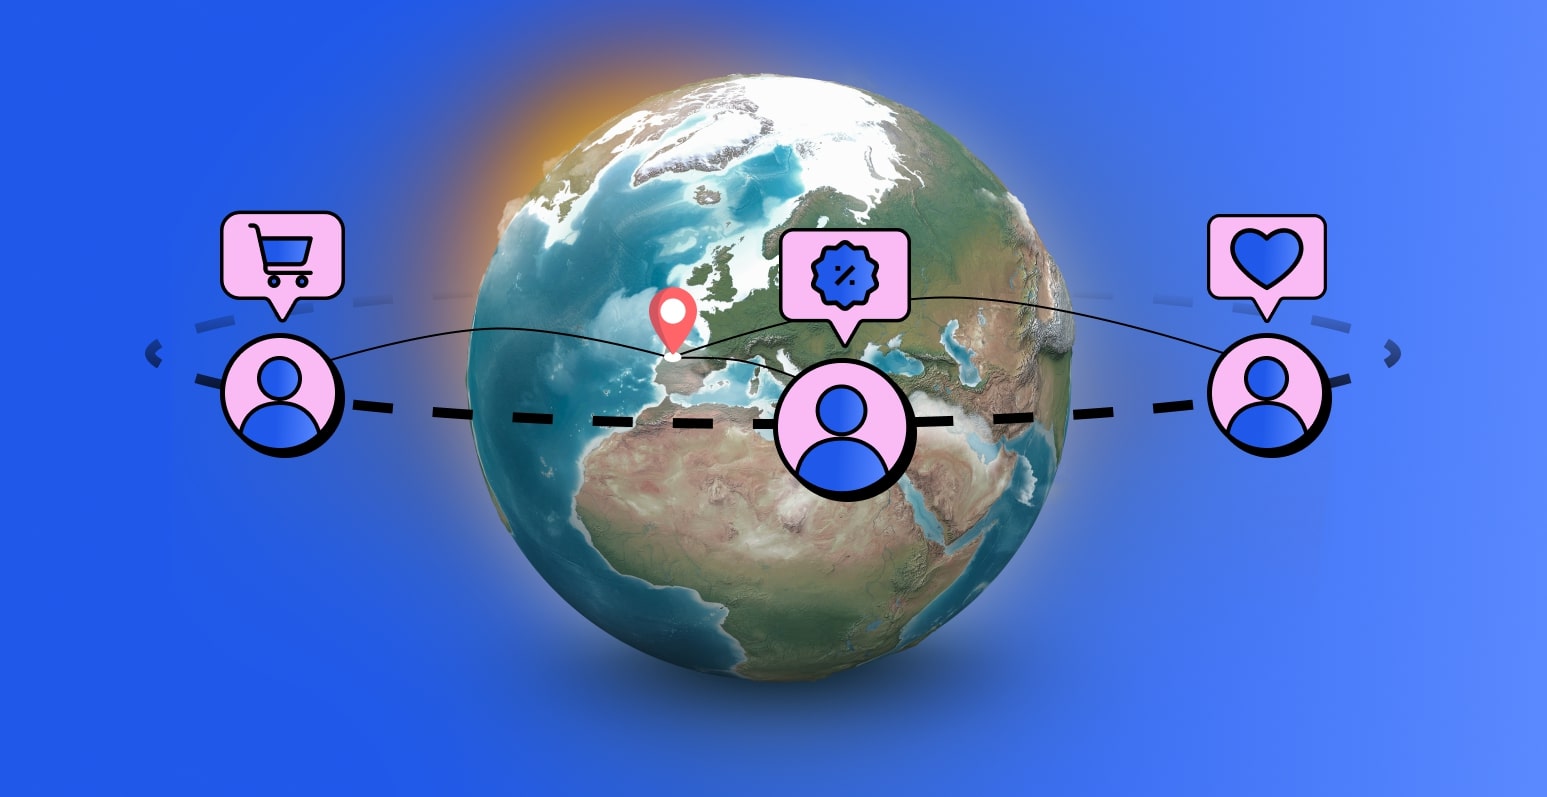 The image shows a 3D world with a geo marker indicating Porto, Portugal, where Napps is founded. Surrounding the world, there are dotted lines connecting three symbolic customers represented by speech bubbles with the following text: ‘Cart’, ‘Wishlist’, and ‘Discounts’. This image symbolizes building a community around a brand and connecting with customers worldwide